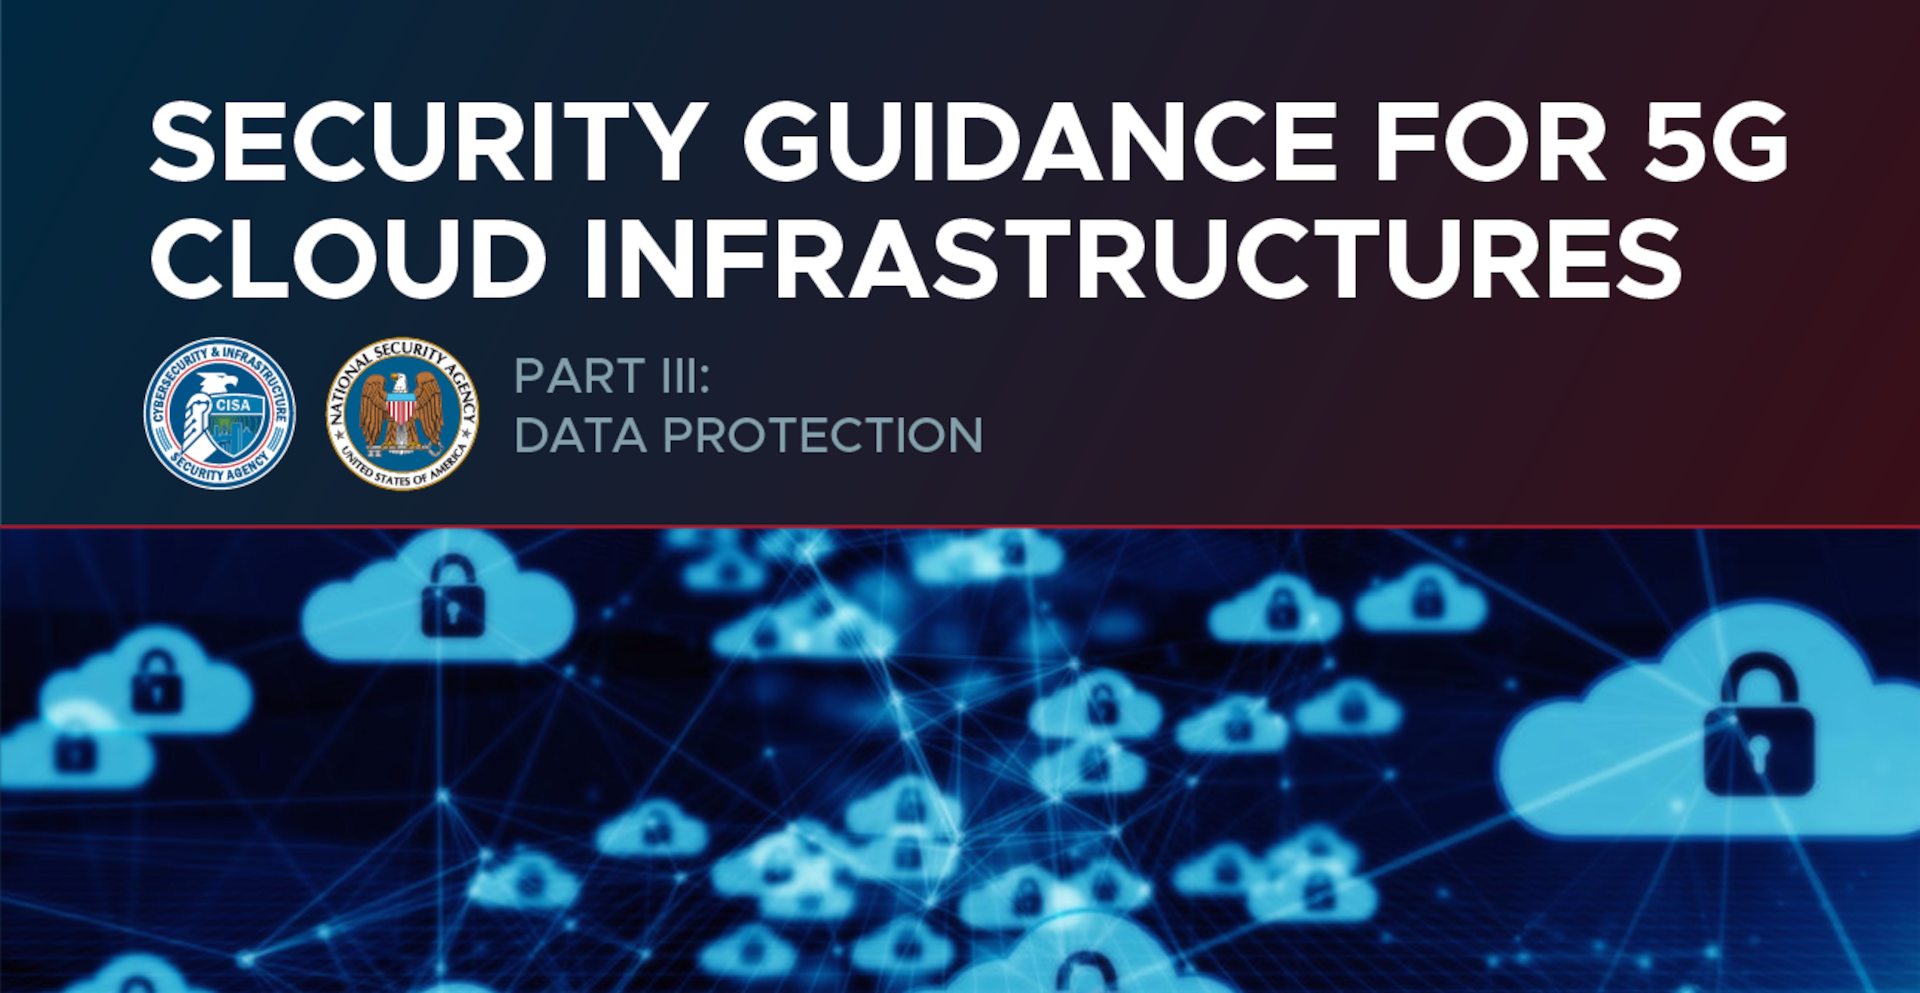 Security Guidance for 5G Cloud Infrastructures Part III: Data Protection